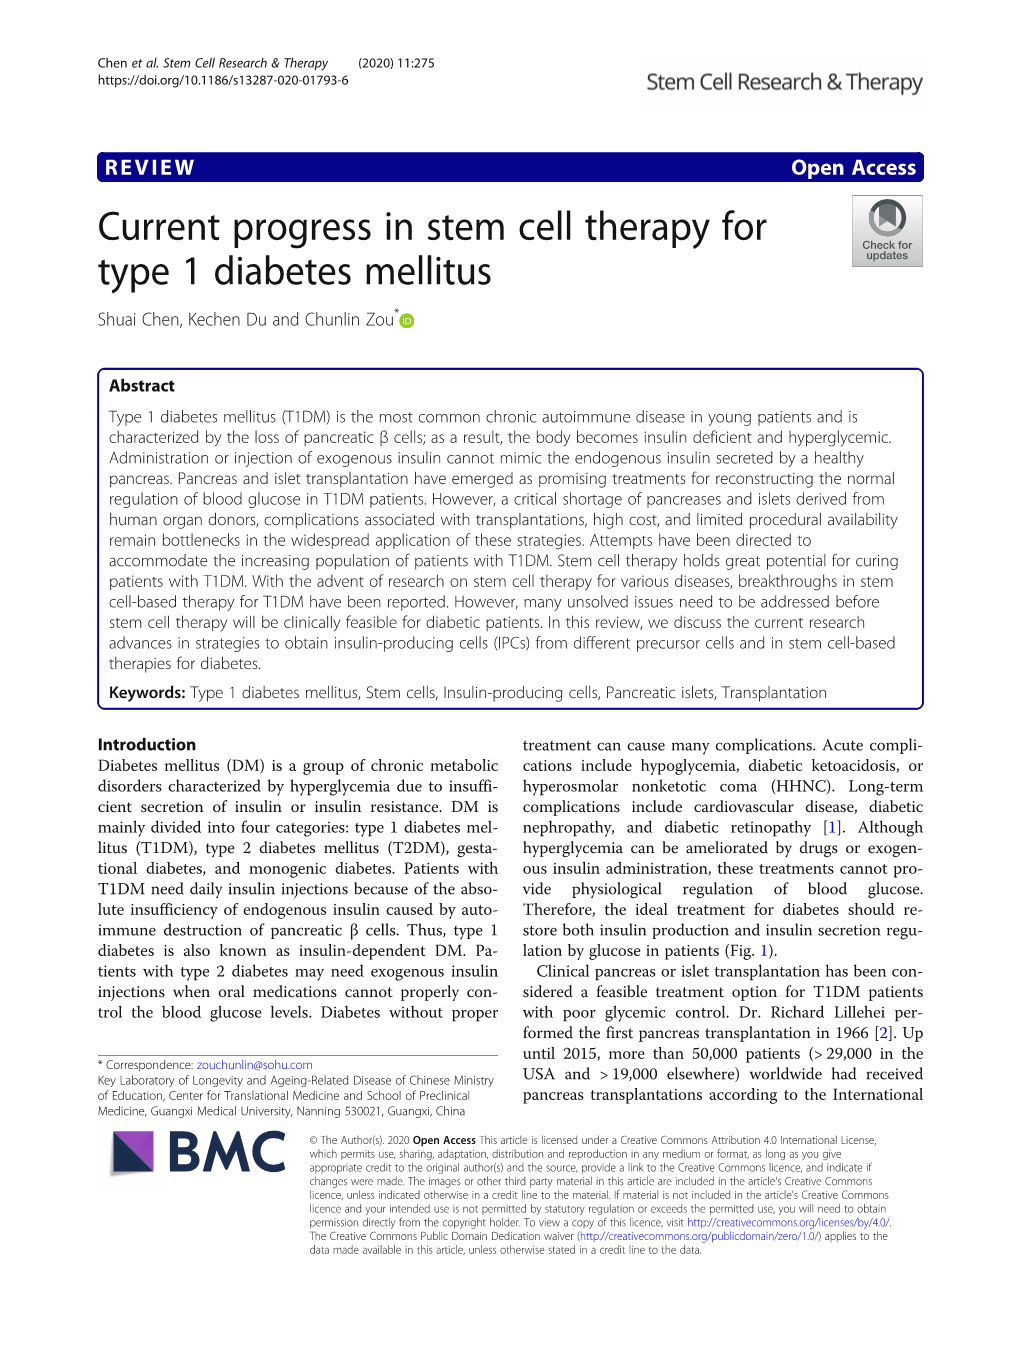 Current Progress in Stem Cell Therapy for Type 1 Diabetes Mellitus Shuai Chen, Kechen Du and Chunlin Zou*